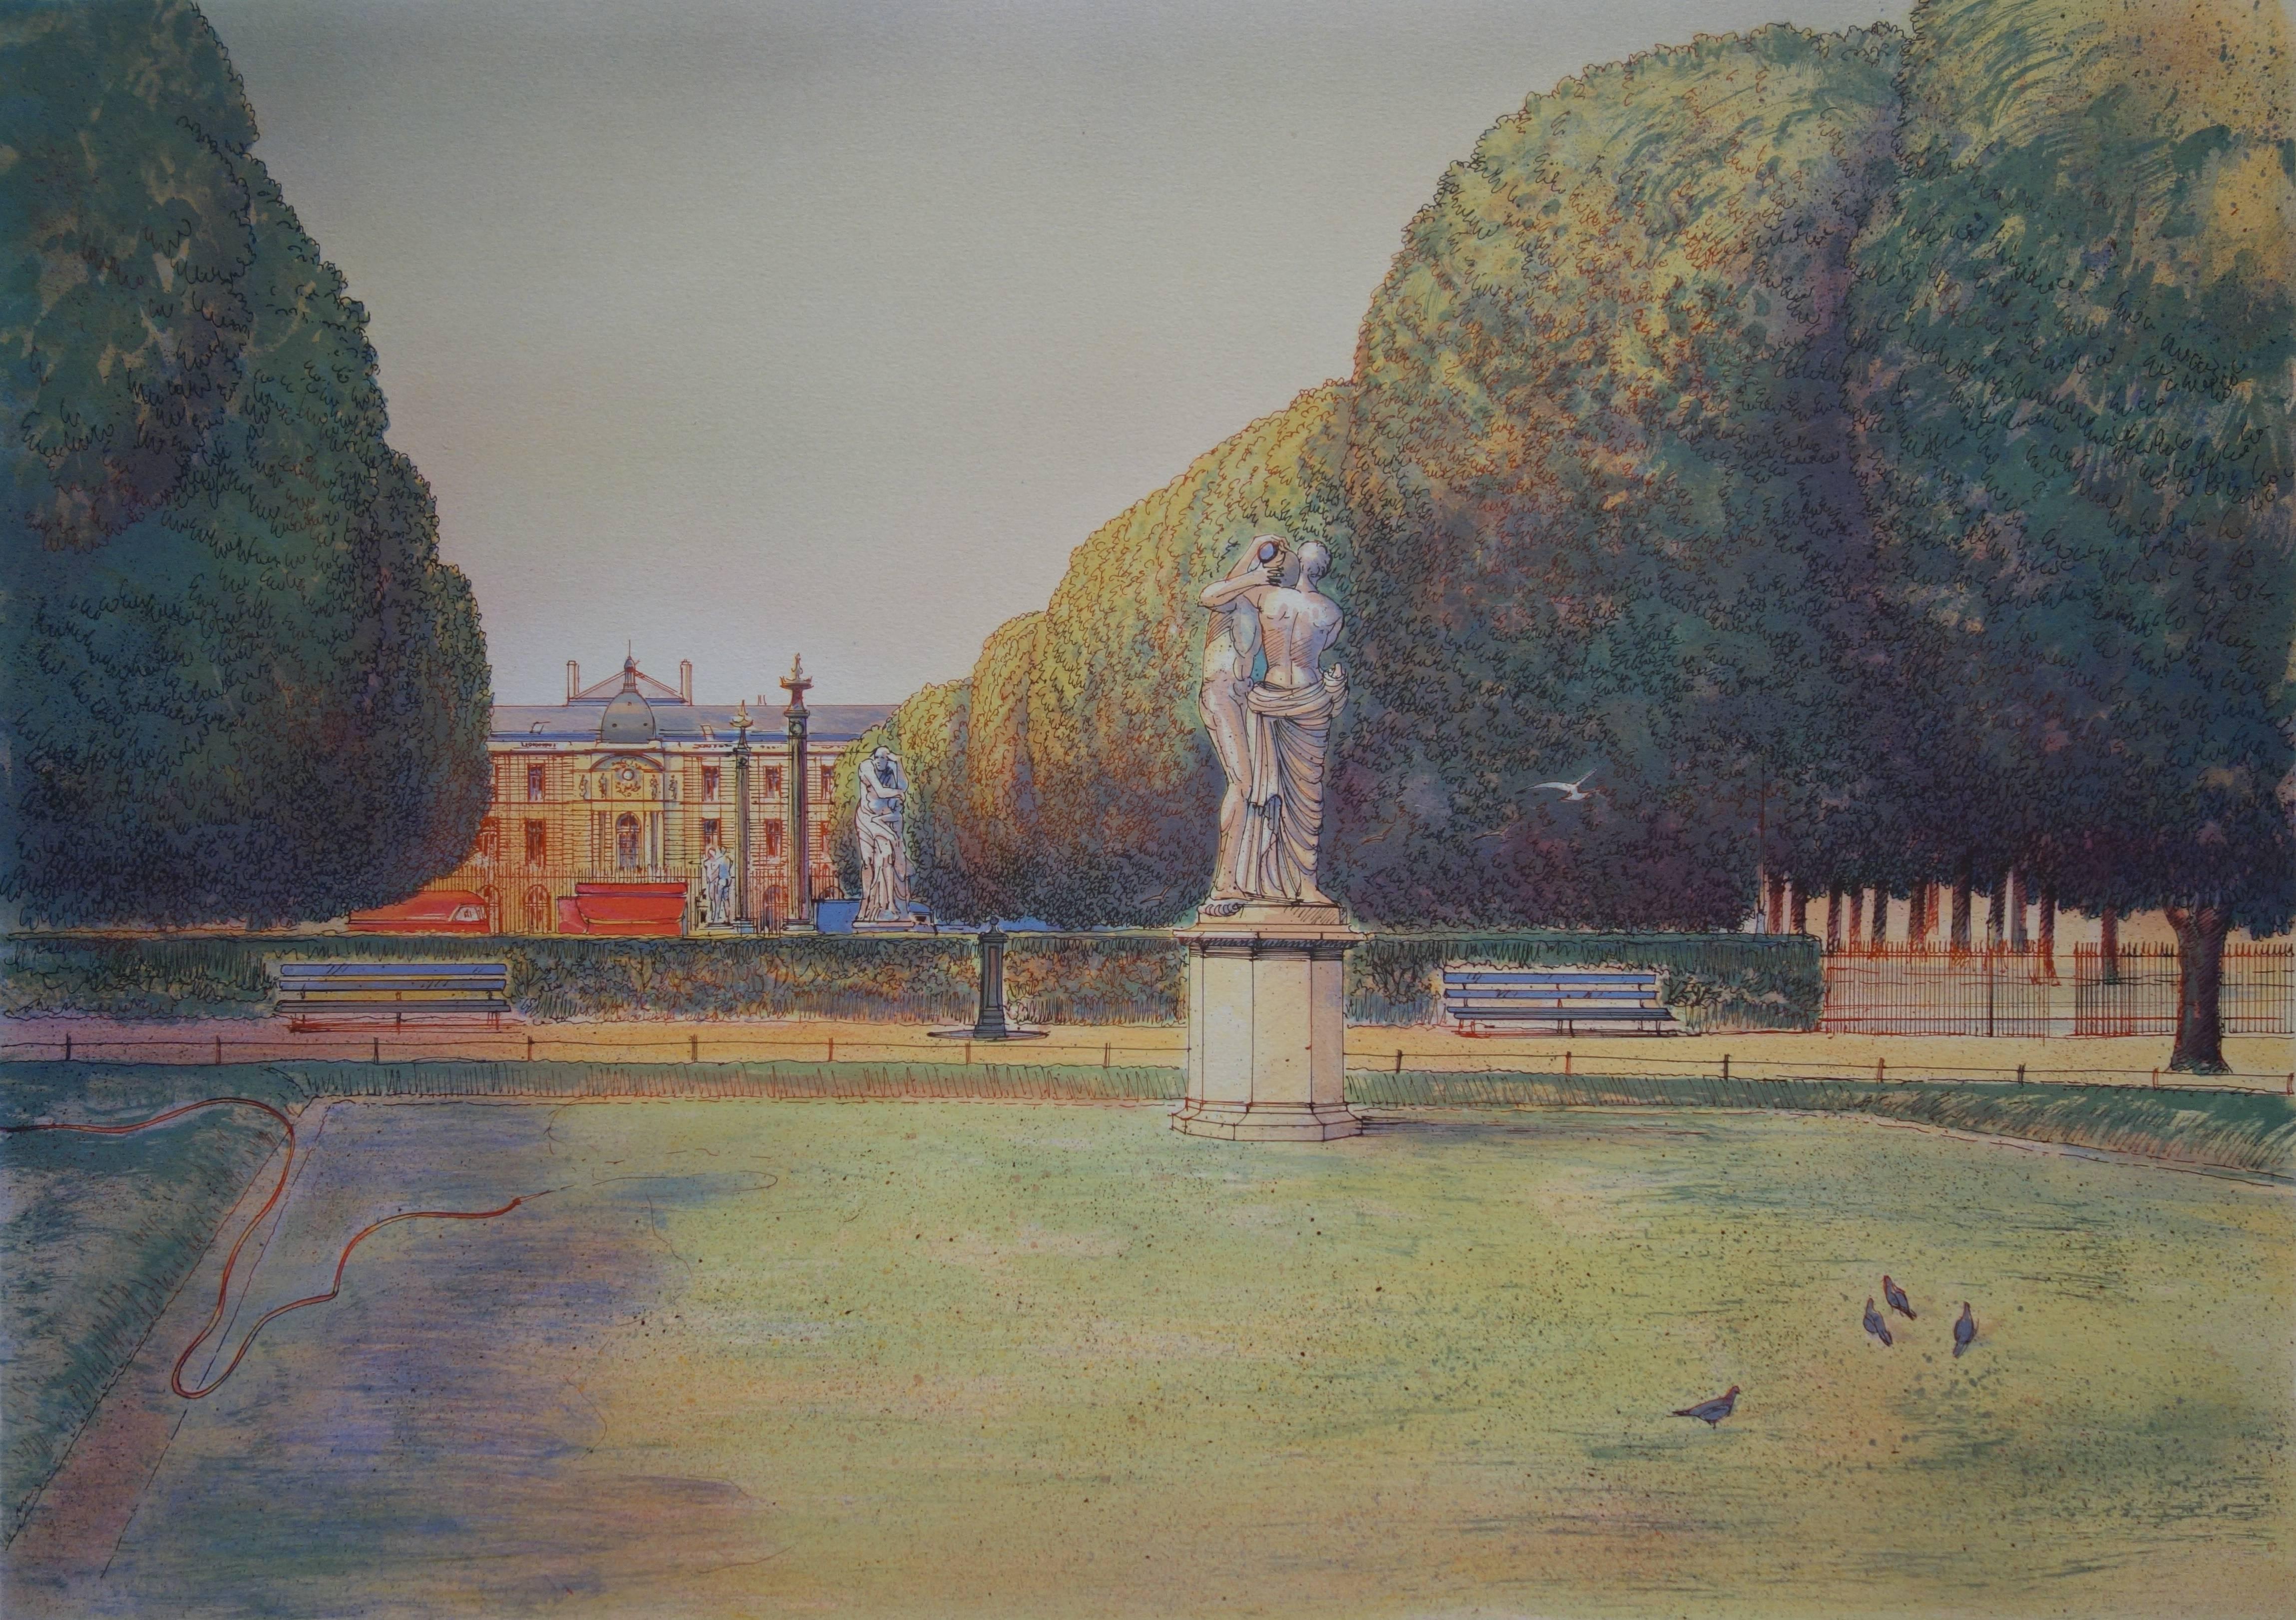 Square in Paris with the Kiss Sculpture - Original handsigned lithograph - 275ex - Realist Print by Rolf RAFFLEWSKI